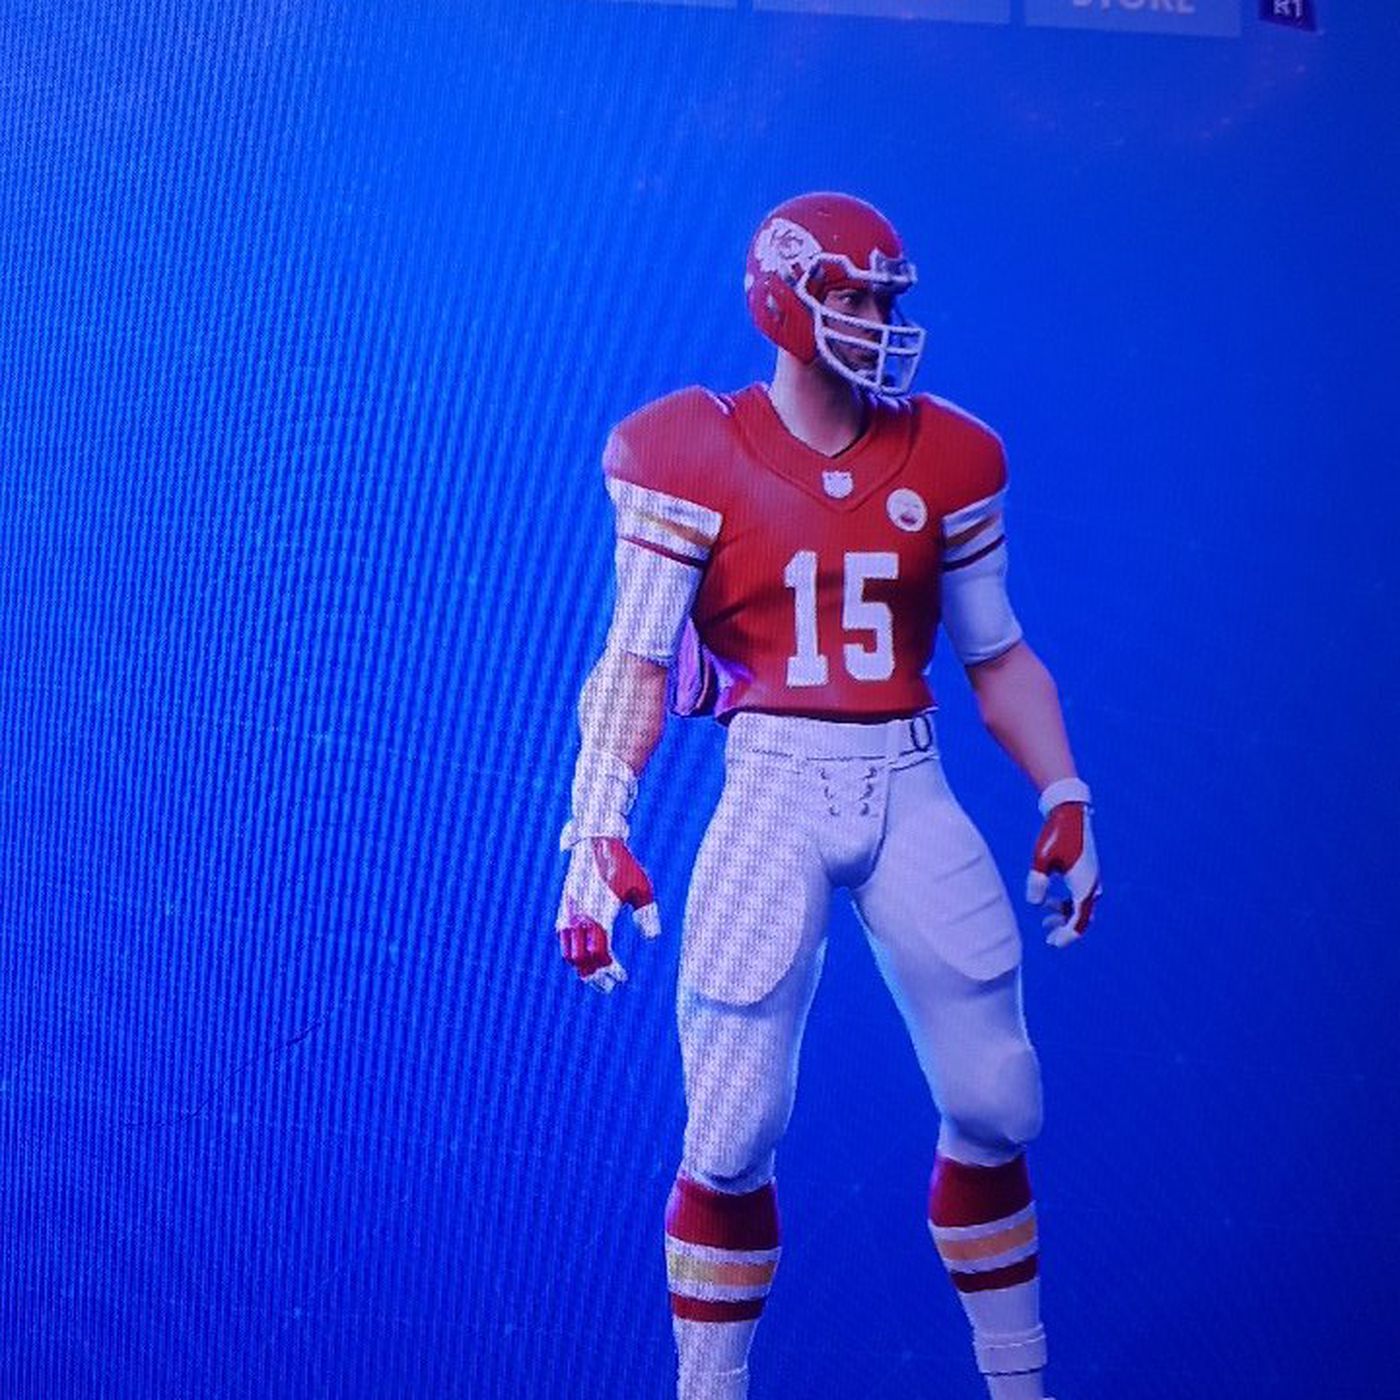 Patrick Mahomes returns to 'Fortnite, ' only to get killed by someone in his jersey